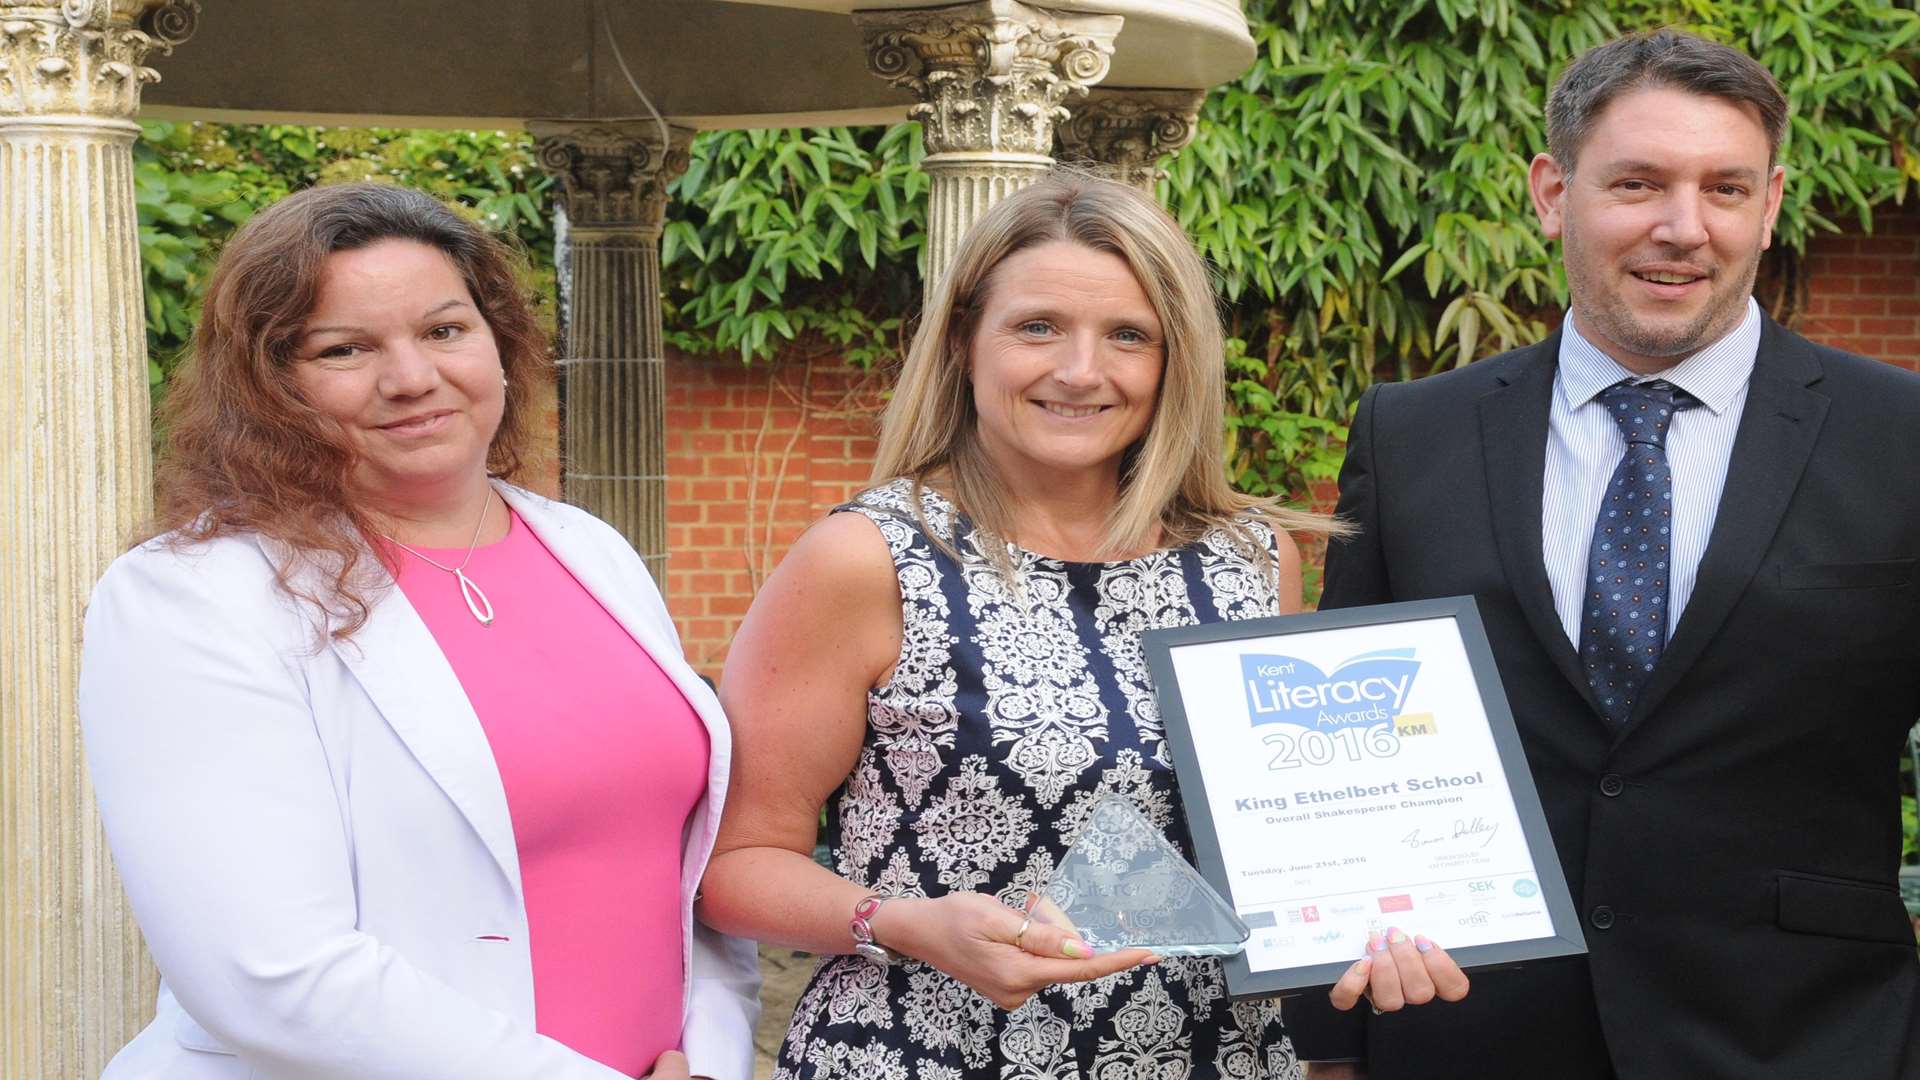 Sarah Wilson of King Ethelbert School, Thanet is presented with the Overall Shakespeare Champion Award by key partners Russell Smith of Orbit South and Claire Turner of School News Group